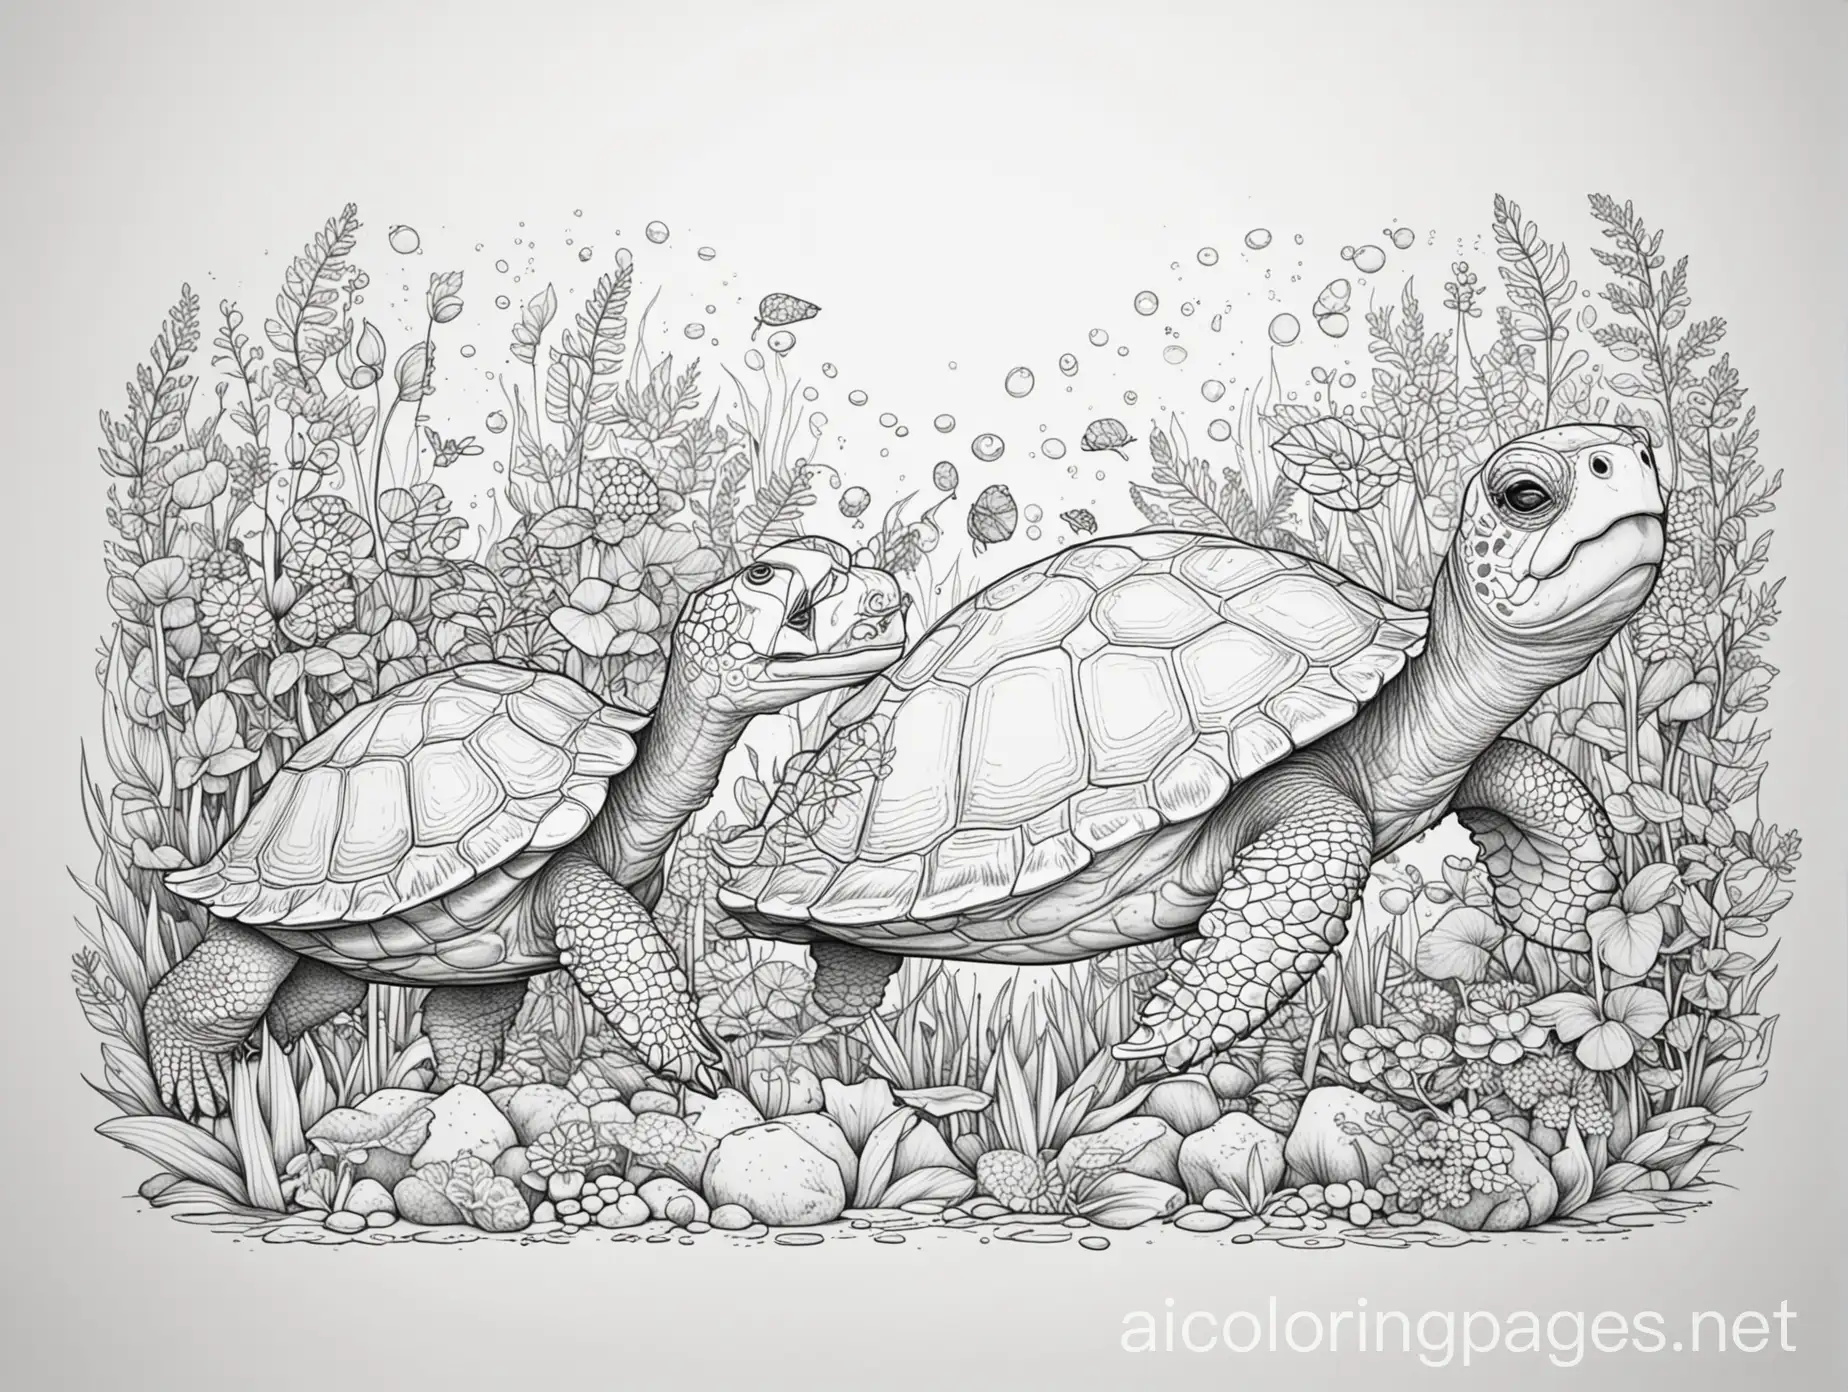 turtle and friends happy morning, Coloring Page, black and white, line art, white background, Simplicity, Ample White Space. The background of the coloring page is plain white to make it easy for young children to color within the lines. The outlines of all the subjects are easy to distinguish, making it simple for kids to color without too much difficulty